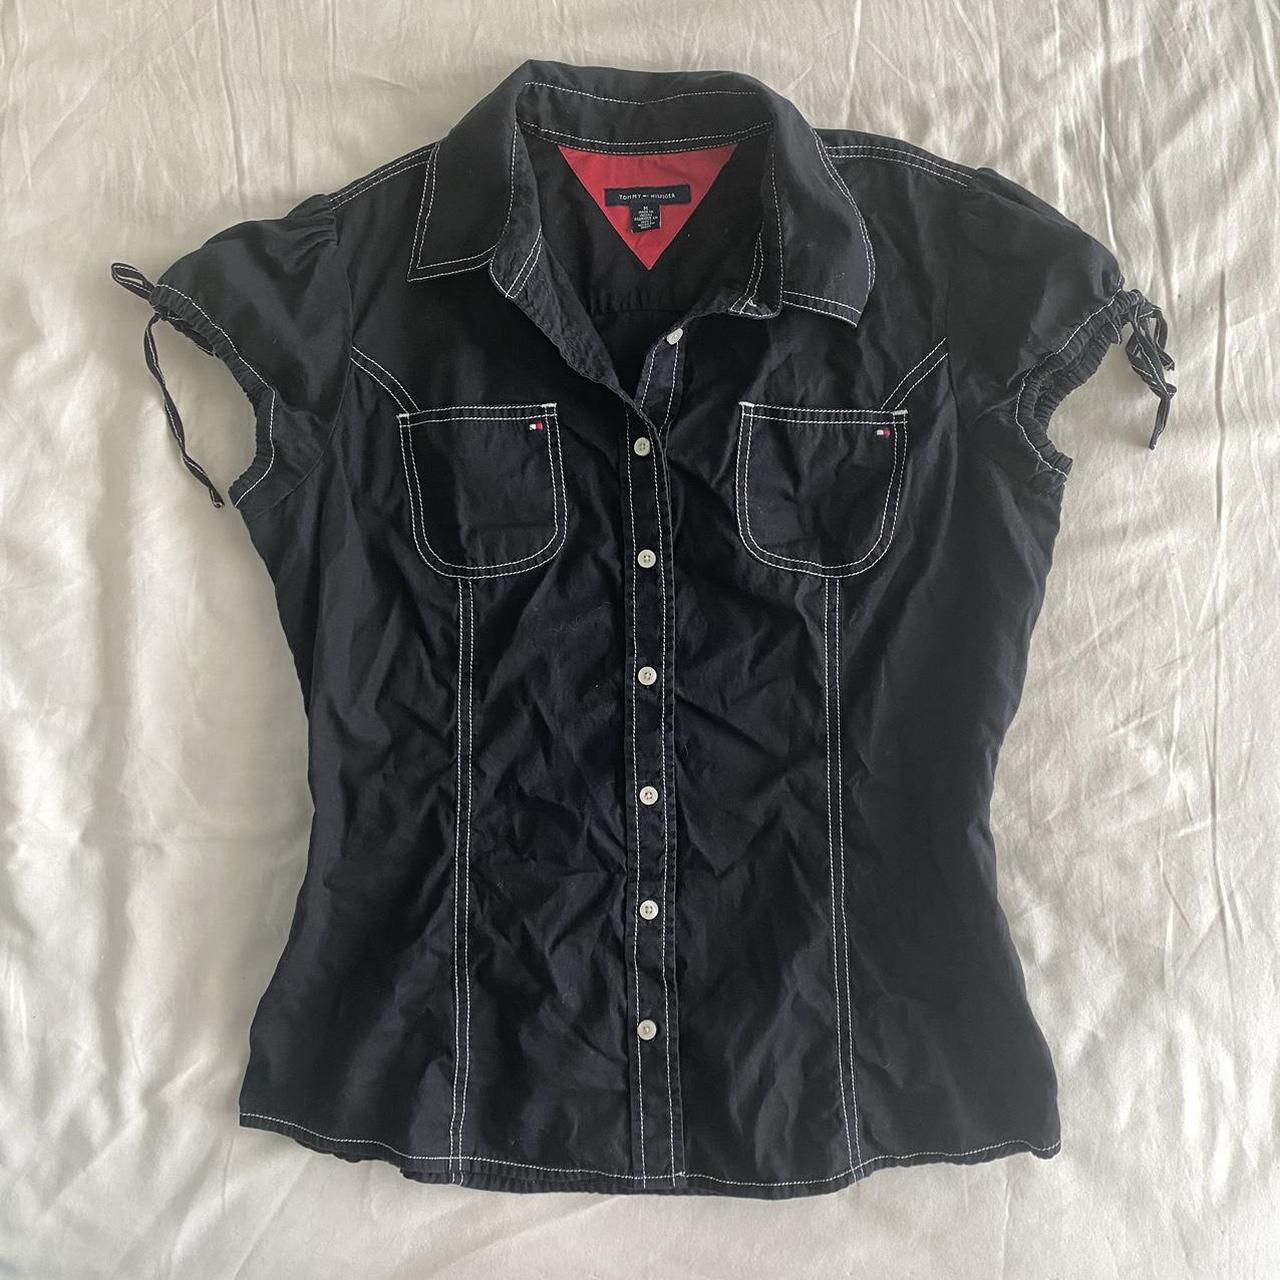 item listed by thrift_gf